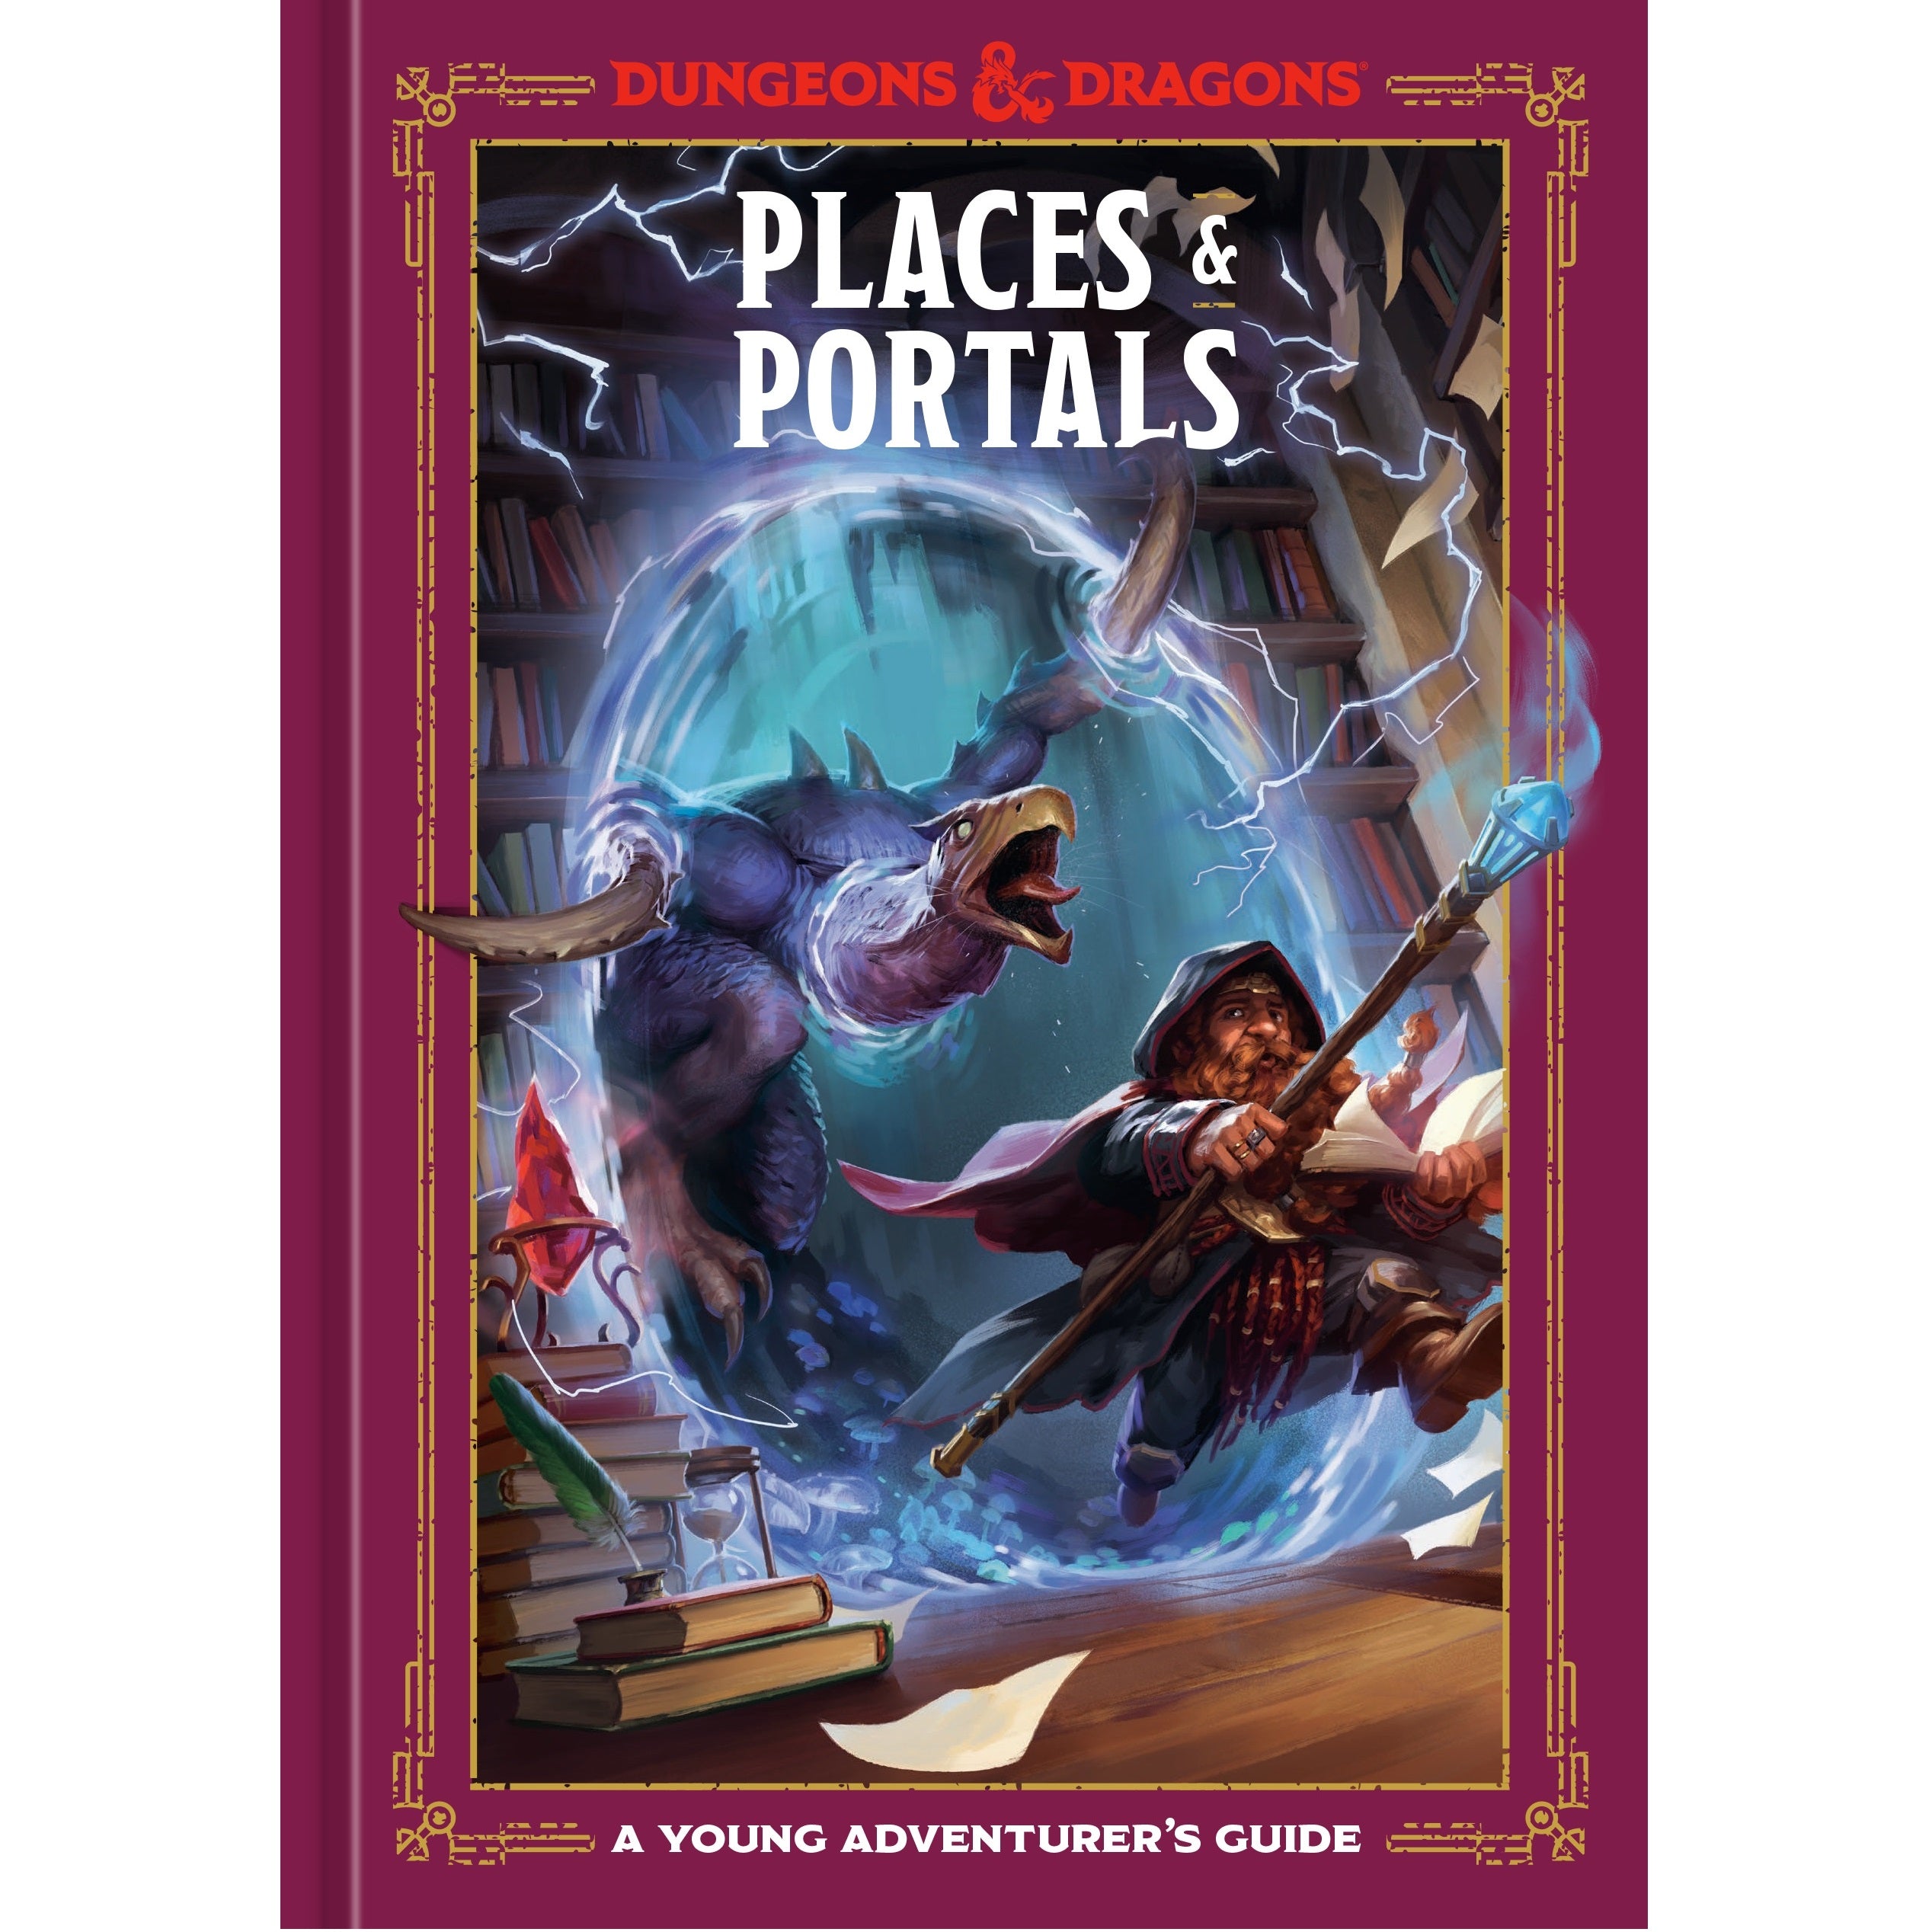 Dungeons & Dragons: A Young Adventurer's Guide - Places & Portals